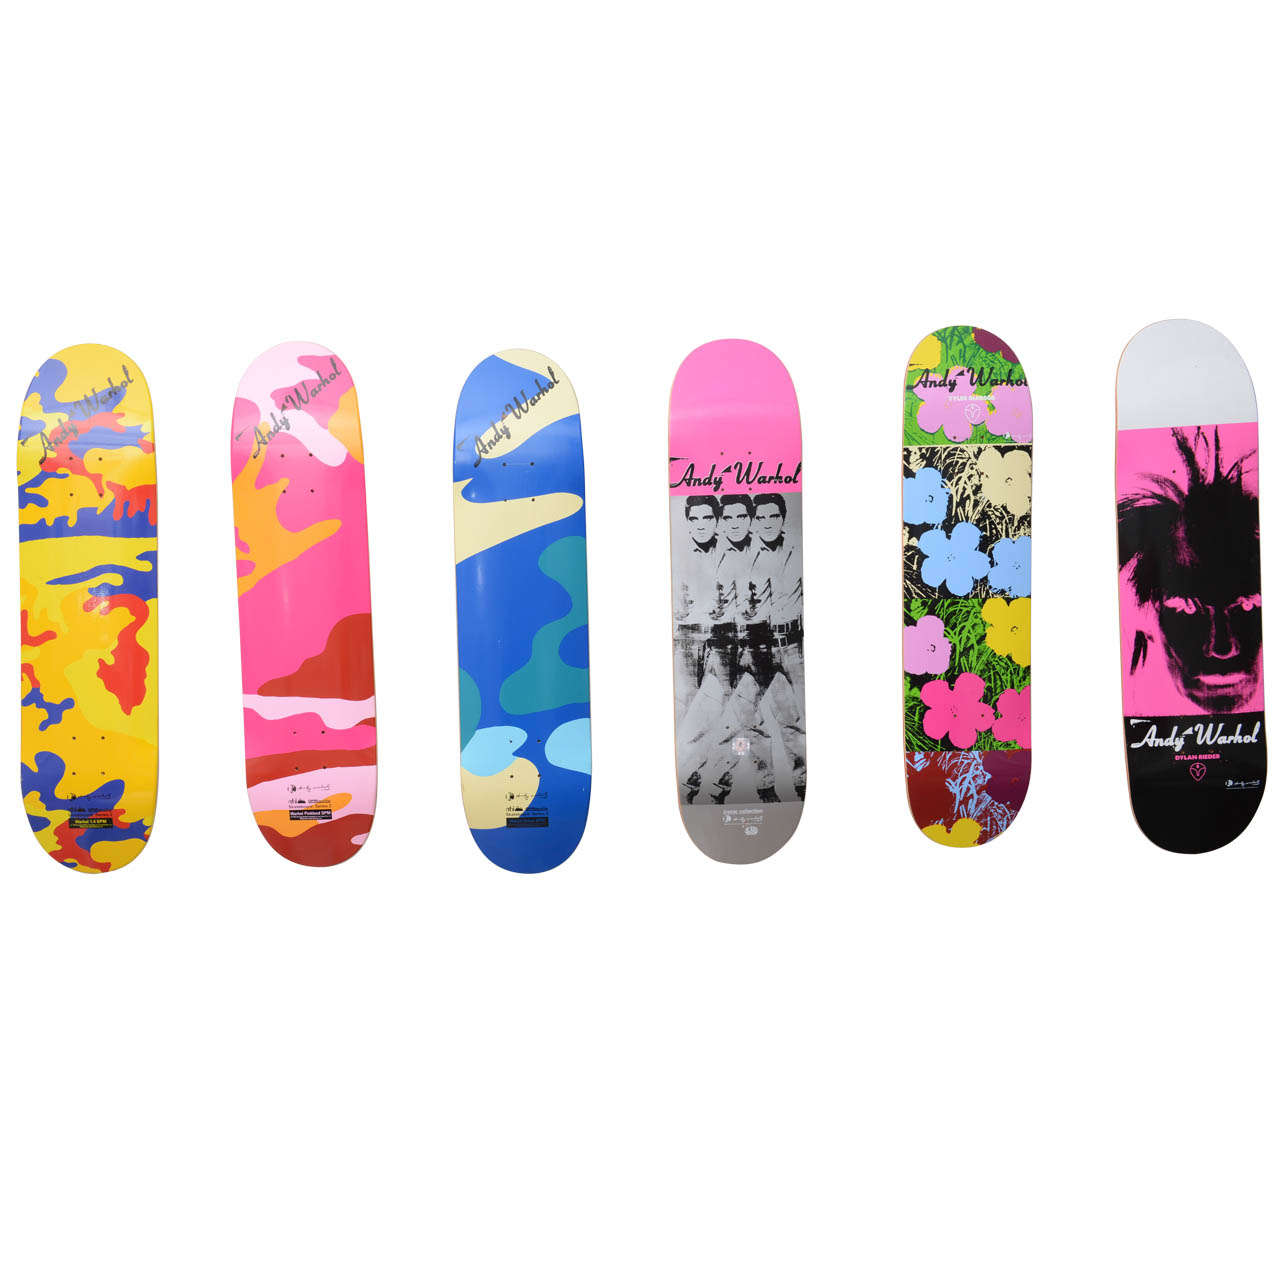 Set of 6 Authorized Andy Warhol Skateboards from 20th Century